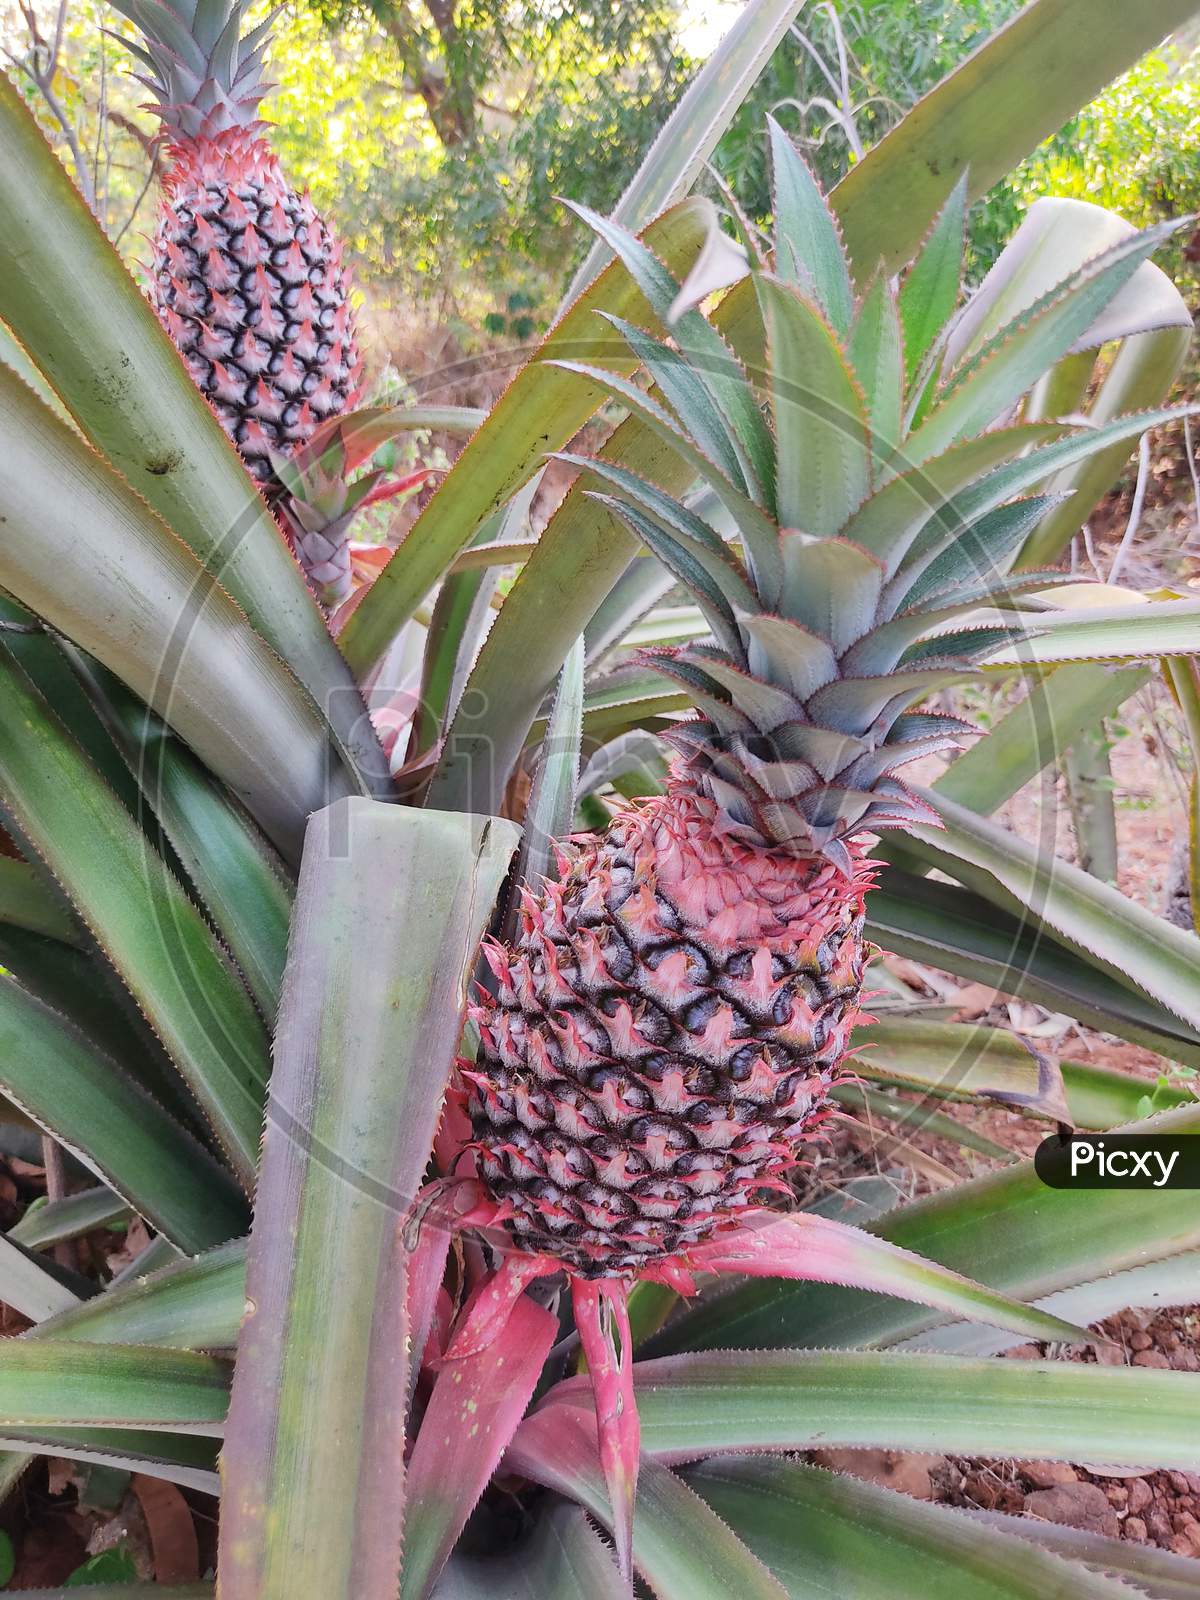 This is indian Pineapple fruit is a testi-juicy fruit.